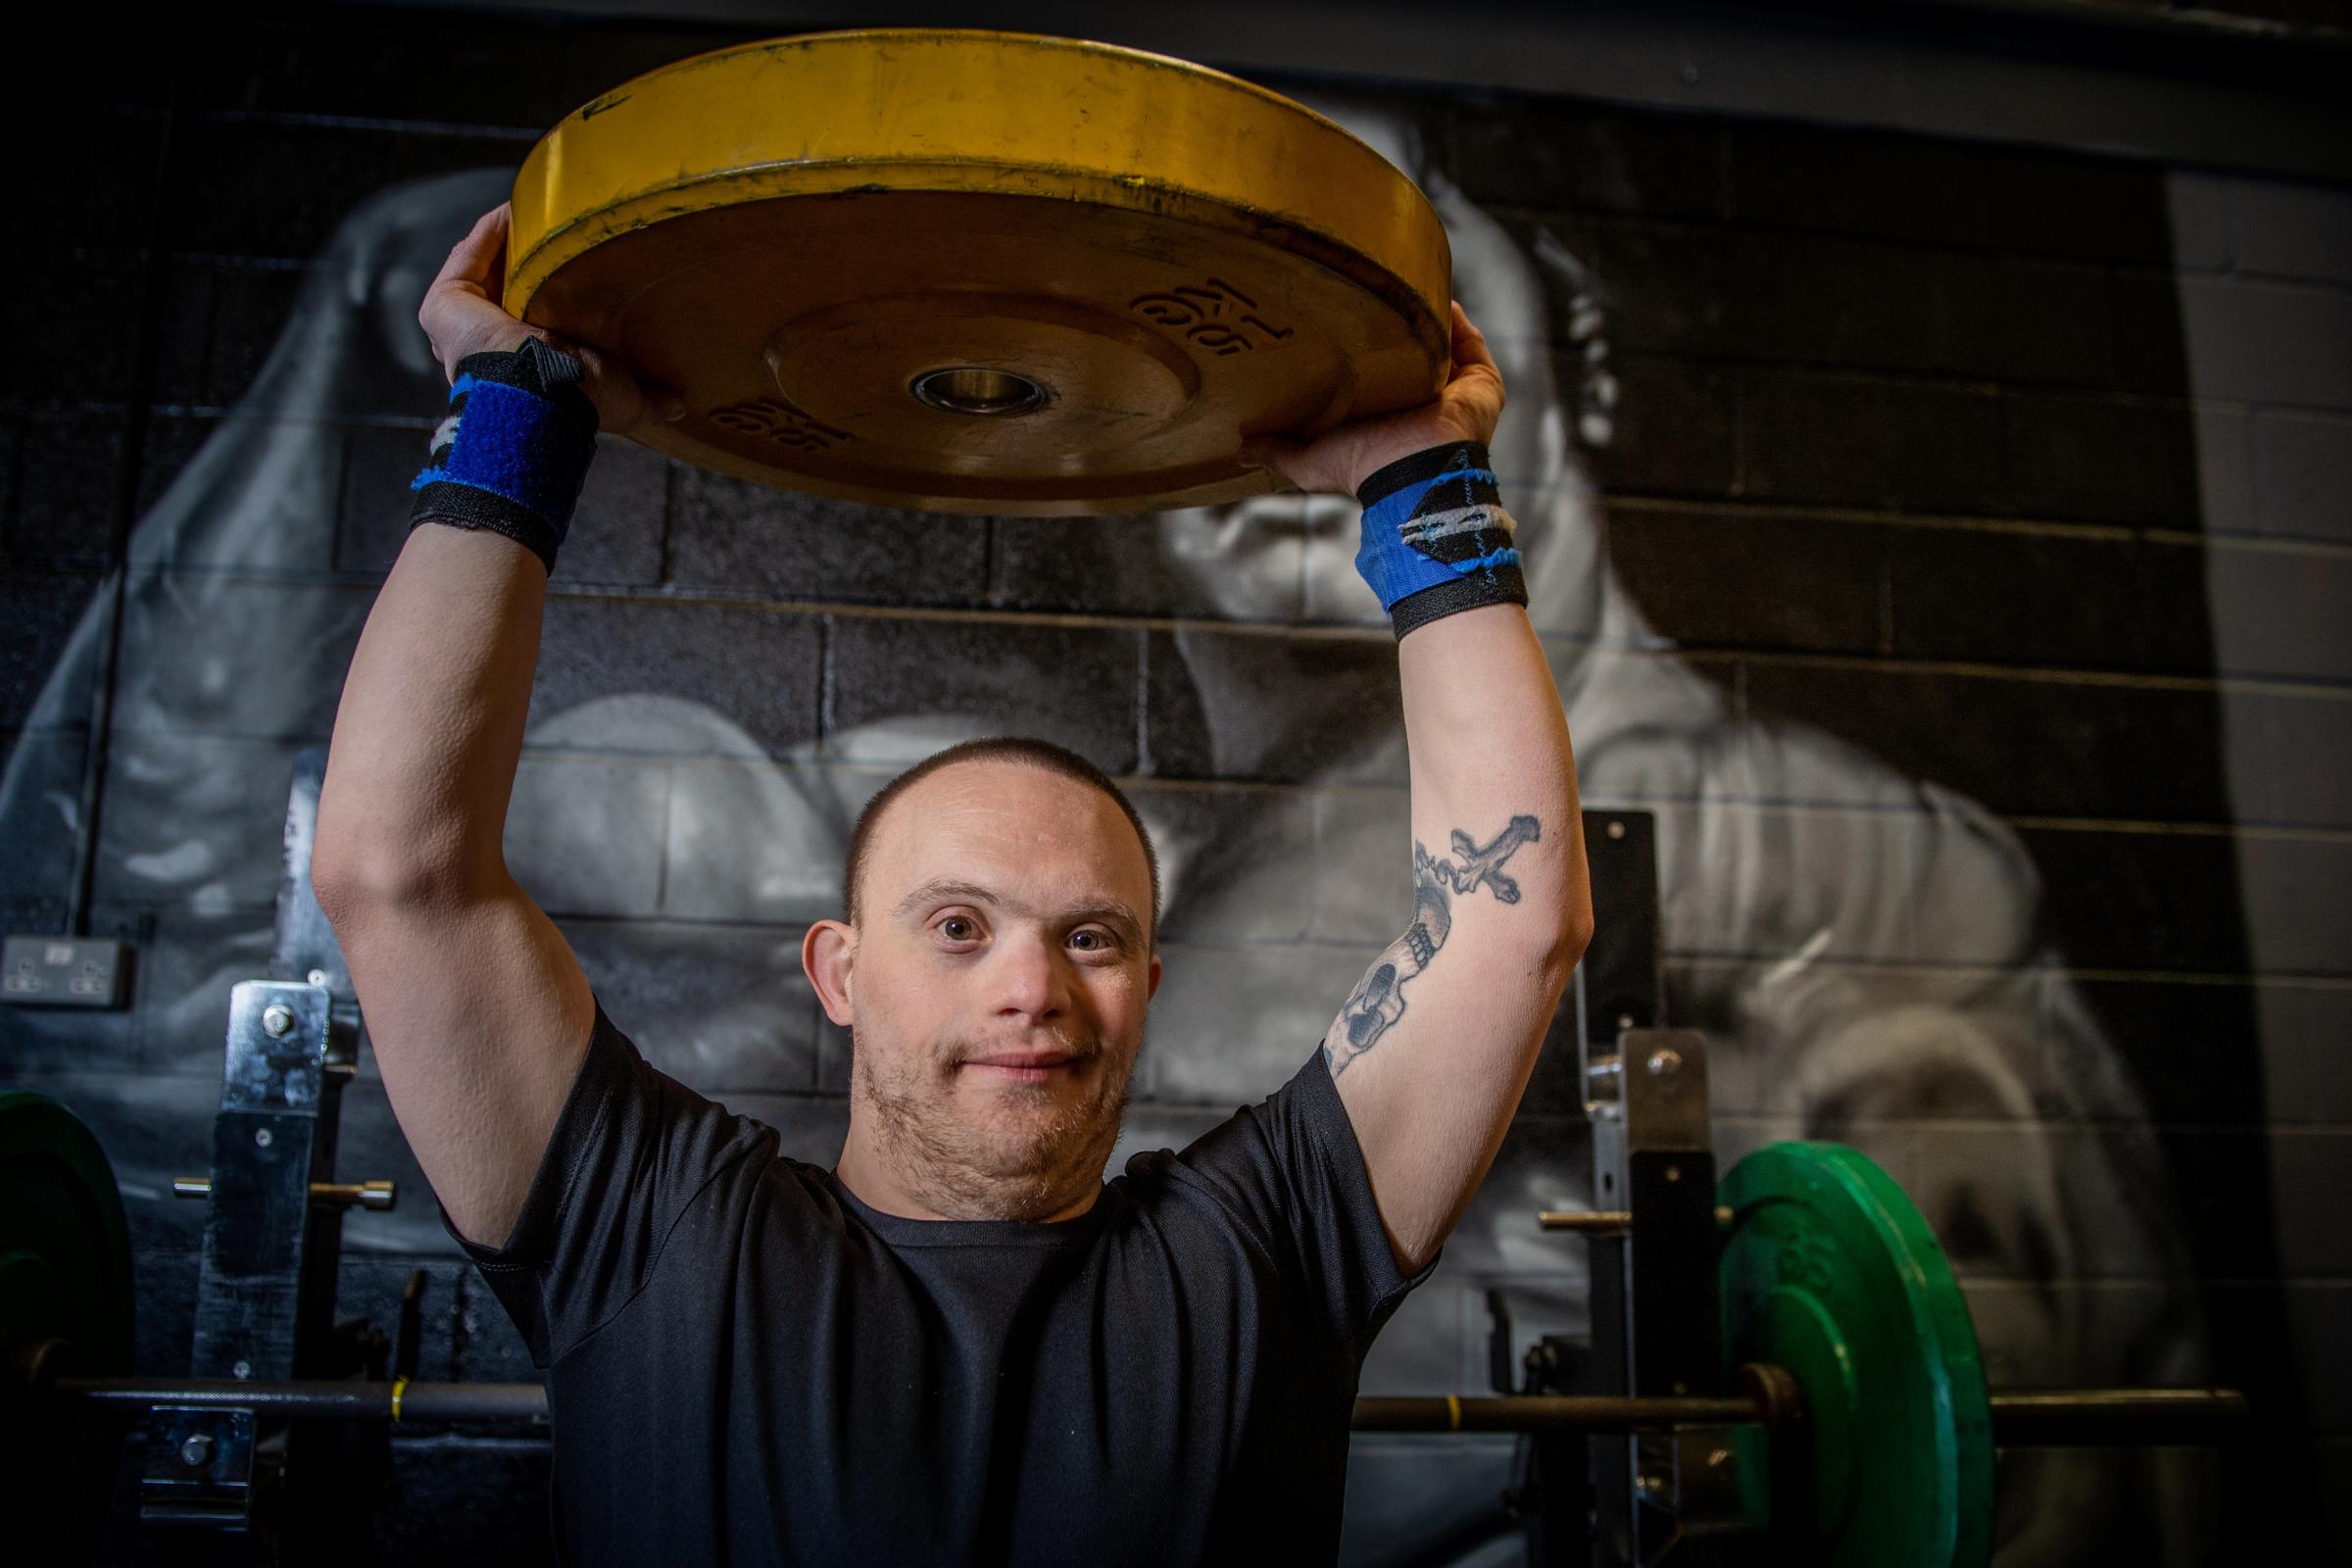 Daniel McGauley doing a workout at his gym in Colchester Essex. Powerlifter Daniel, who has Downs Syndrome and autism has been crowned British Champion. See SWNS story SWCAlift. A powerlifter with Downs Syndrome whose parents were told he would never